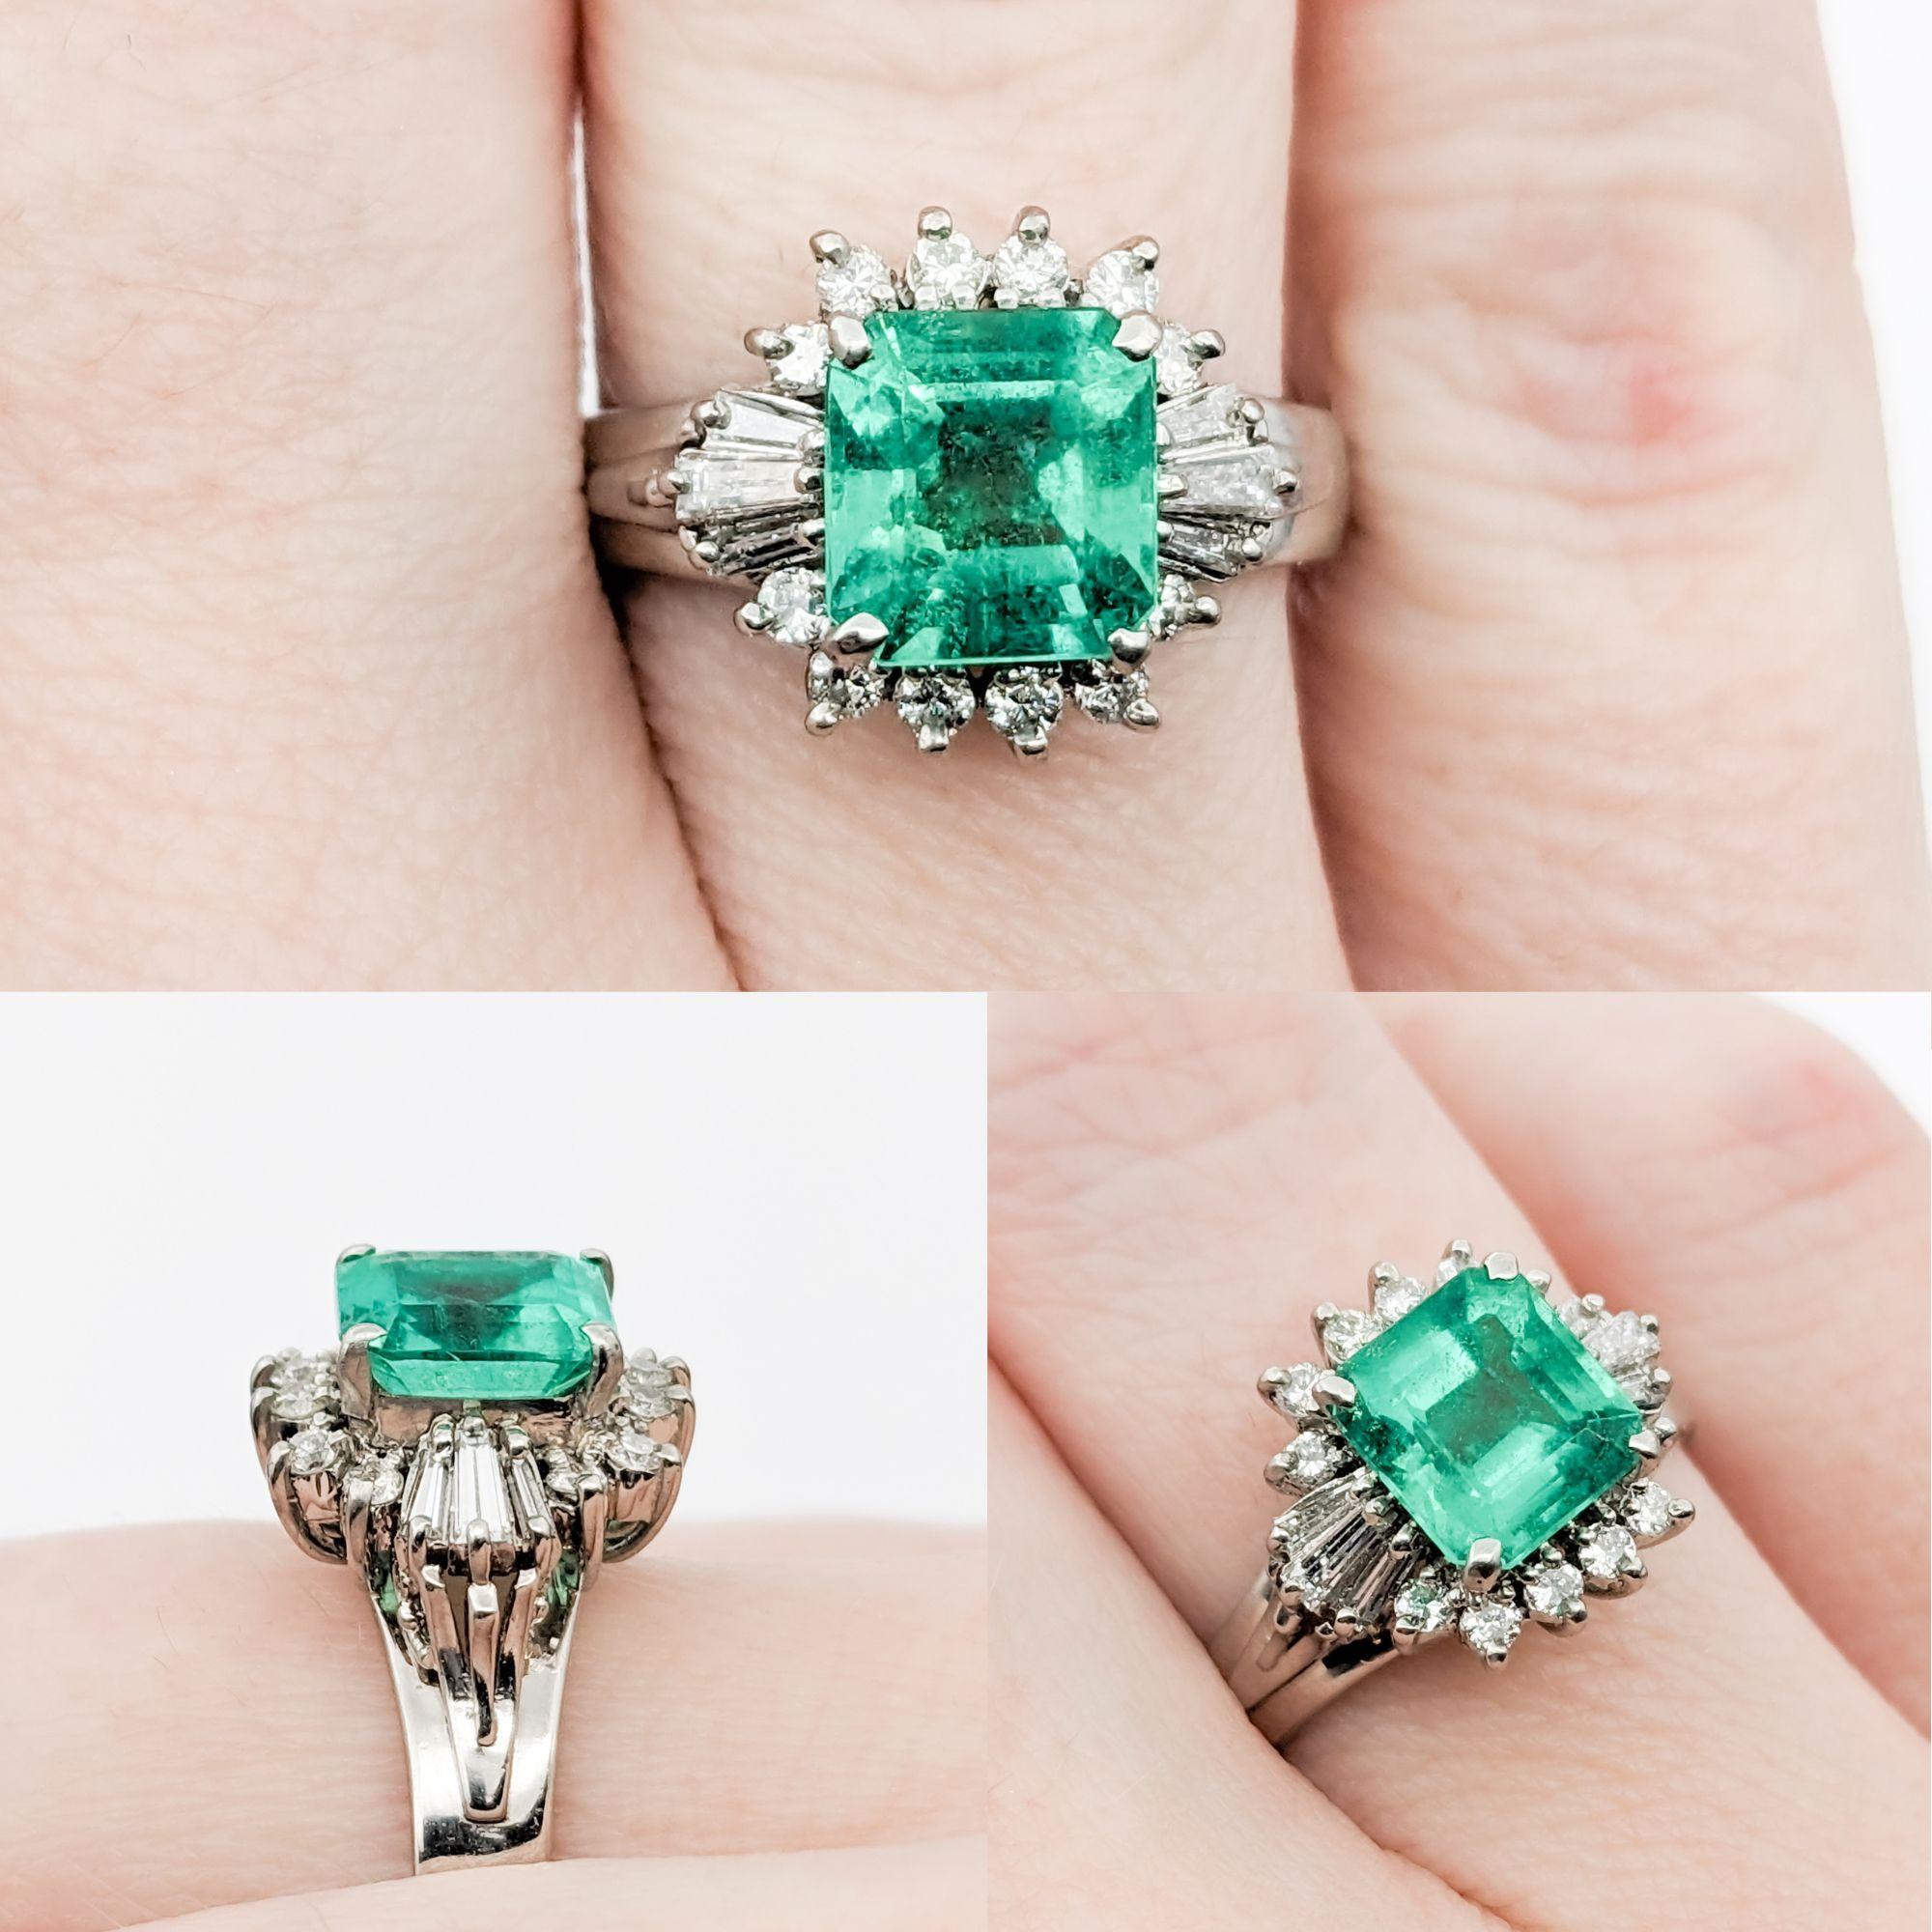 GIA 1.36ct Emerald & Diamonds Ring In Platinum

Crafted in luxurious 900 platinum, this ring showcases a stunning 1.36ct emerald centerpiece, complemented by 0.32ctw of diamonds in a mix of round and baguette cuts. The diamonds, with SI clarity and